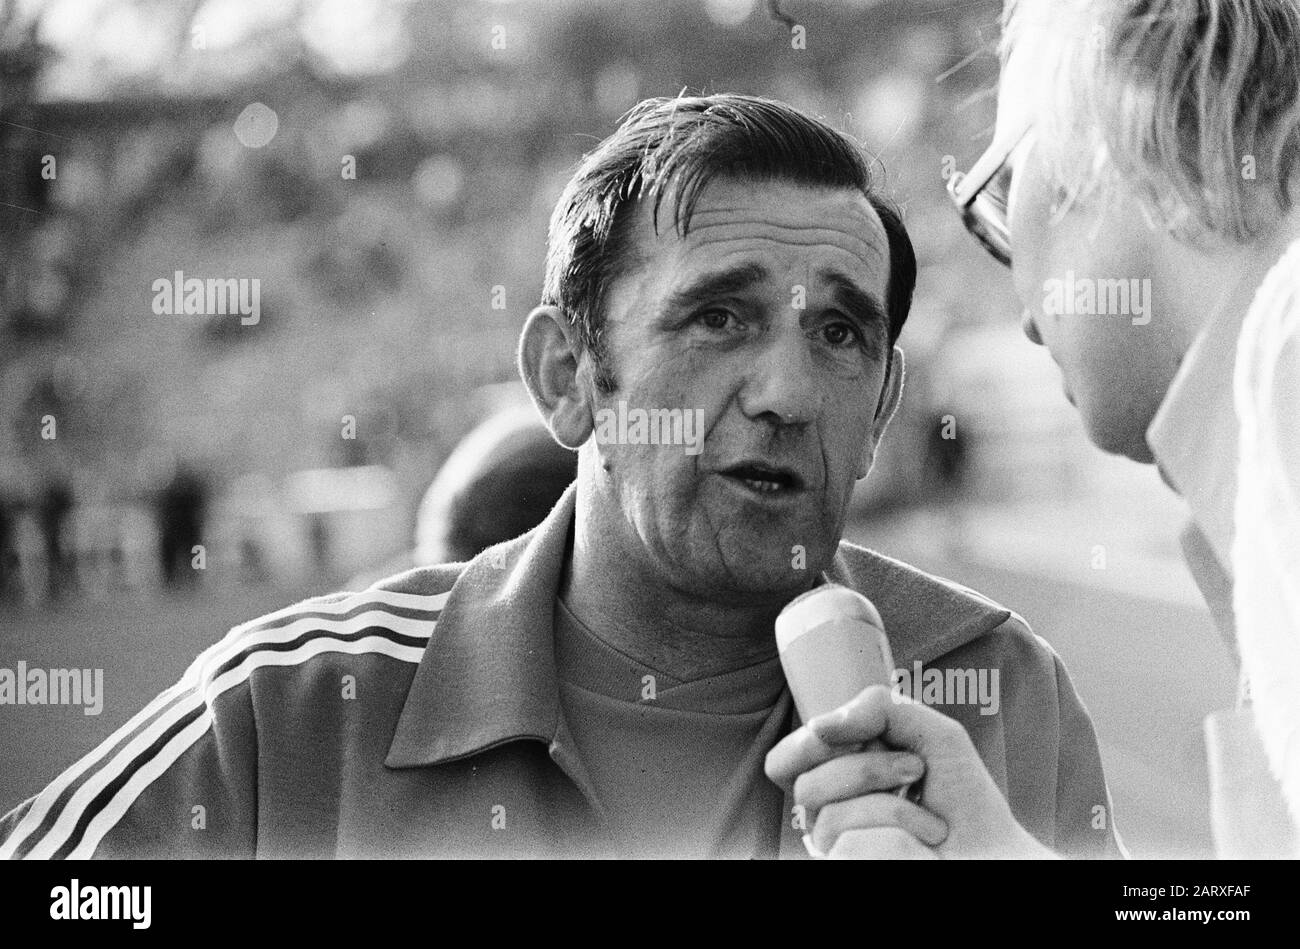 Soccer Interland West Germany-Netherlands 1-1  Trainer Knobel at the end Date: 17 May 1975 Location: Germany, Frankfurt Keywords: interlands, portraits, sports, trainers, football Personal name: Knobel, George Stock Photo